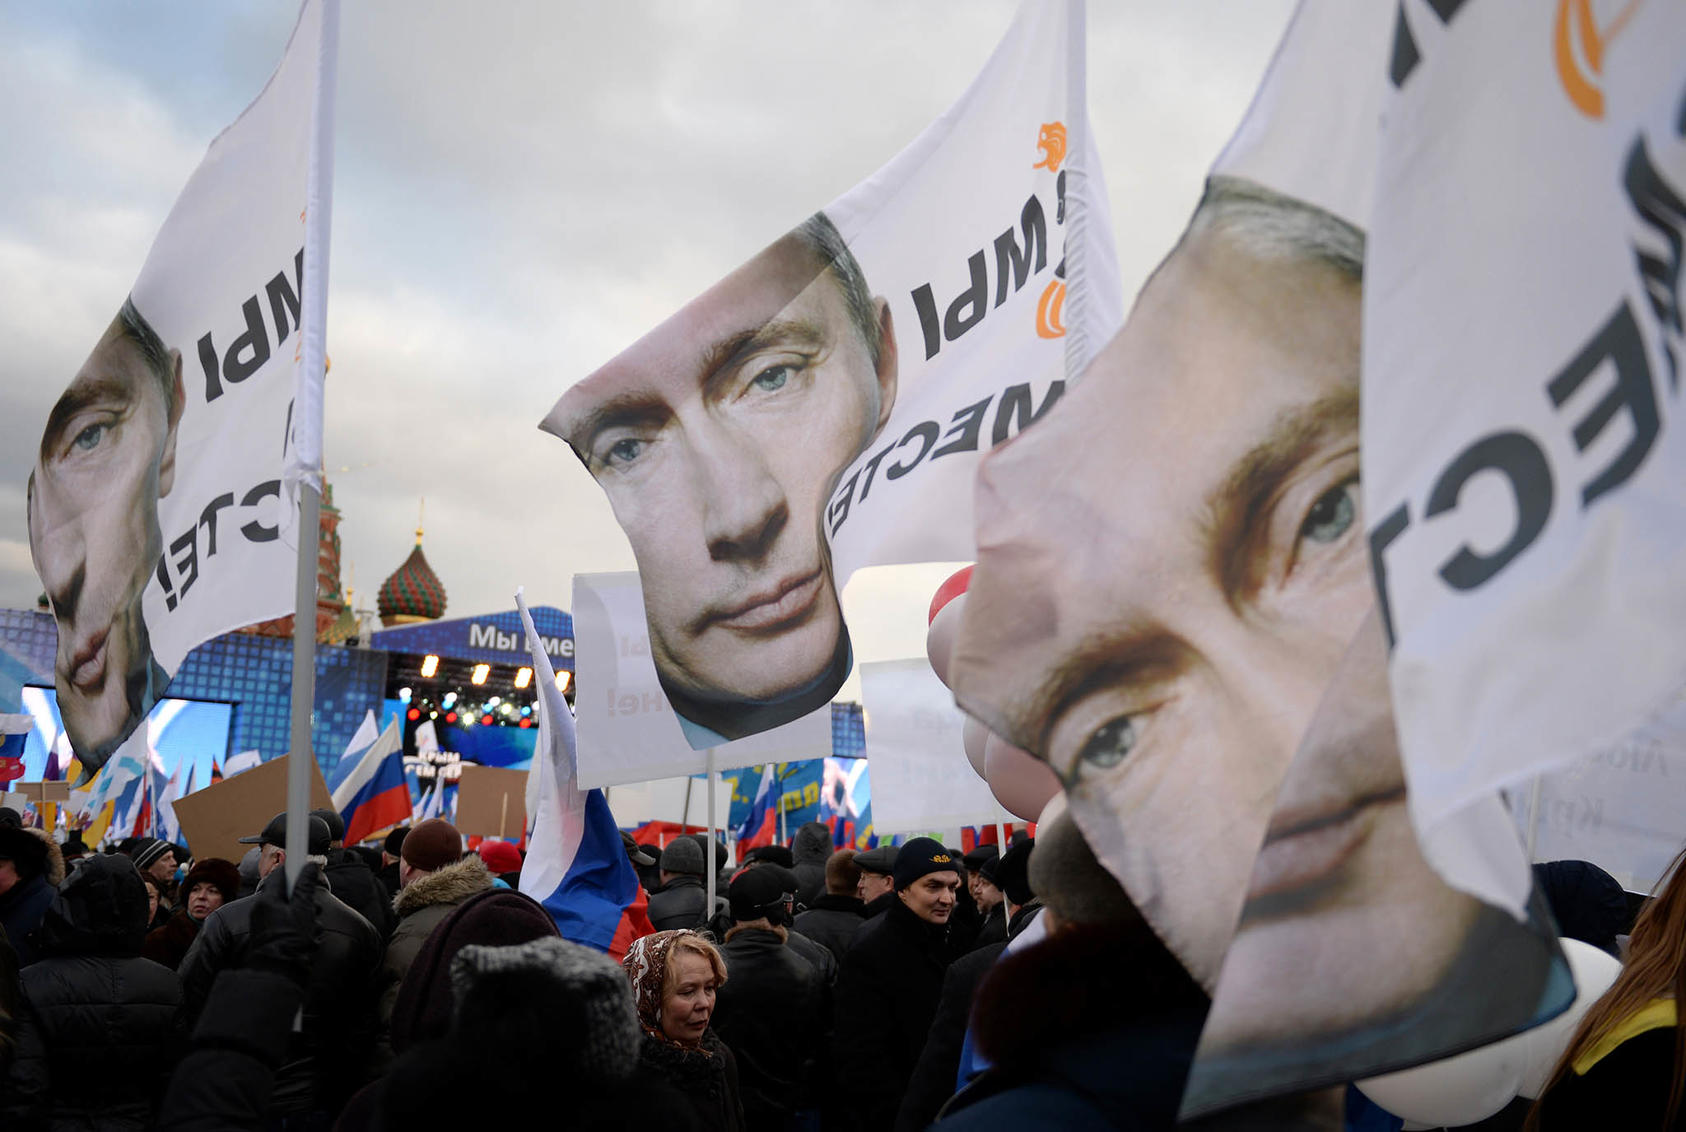 Crowds in Red Square in Moscow on the day President Vladimir Putin asked Parliament to accept Crimea into the Russian Federation, March 18, 2014. (James Hill/The New York Times)